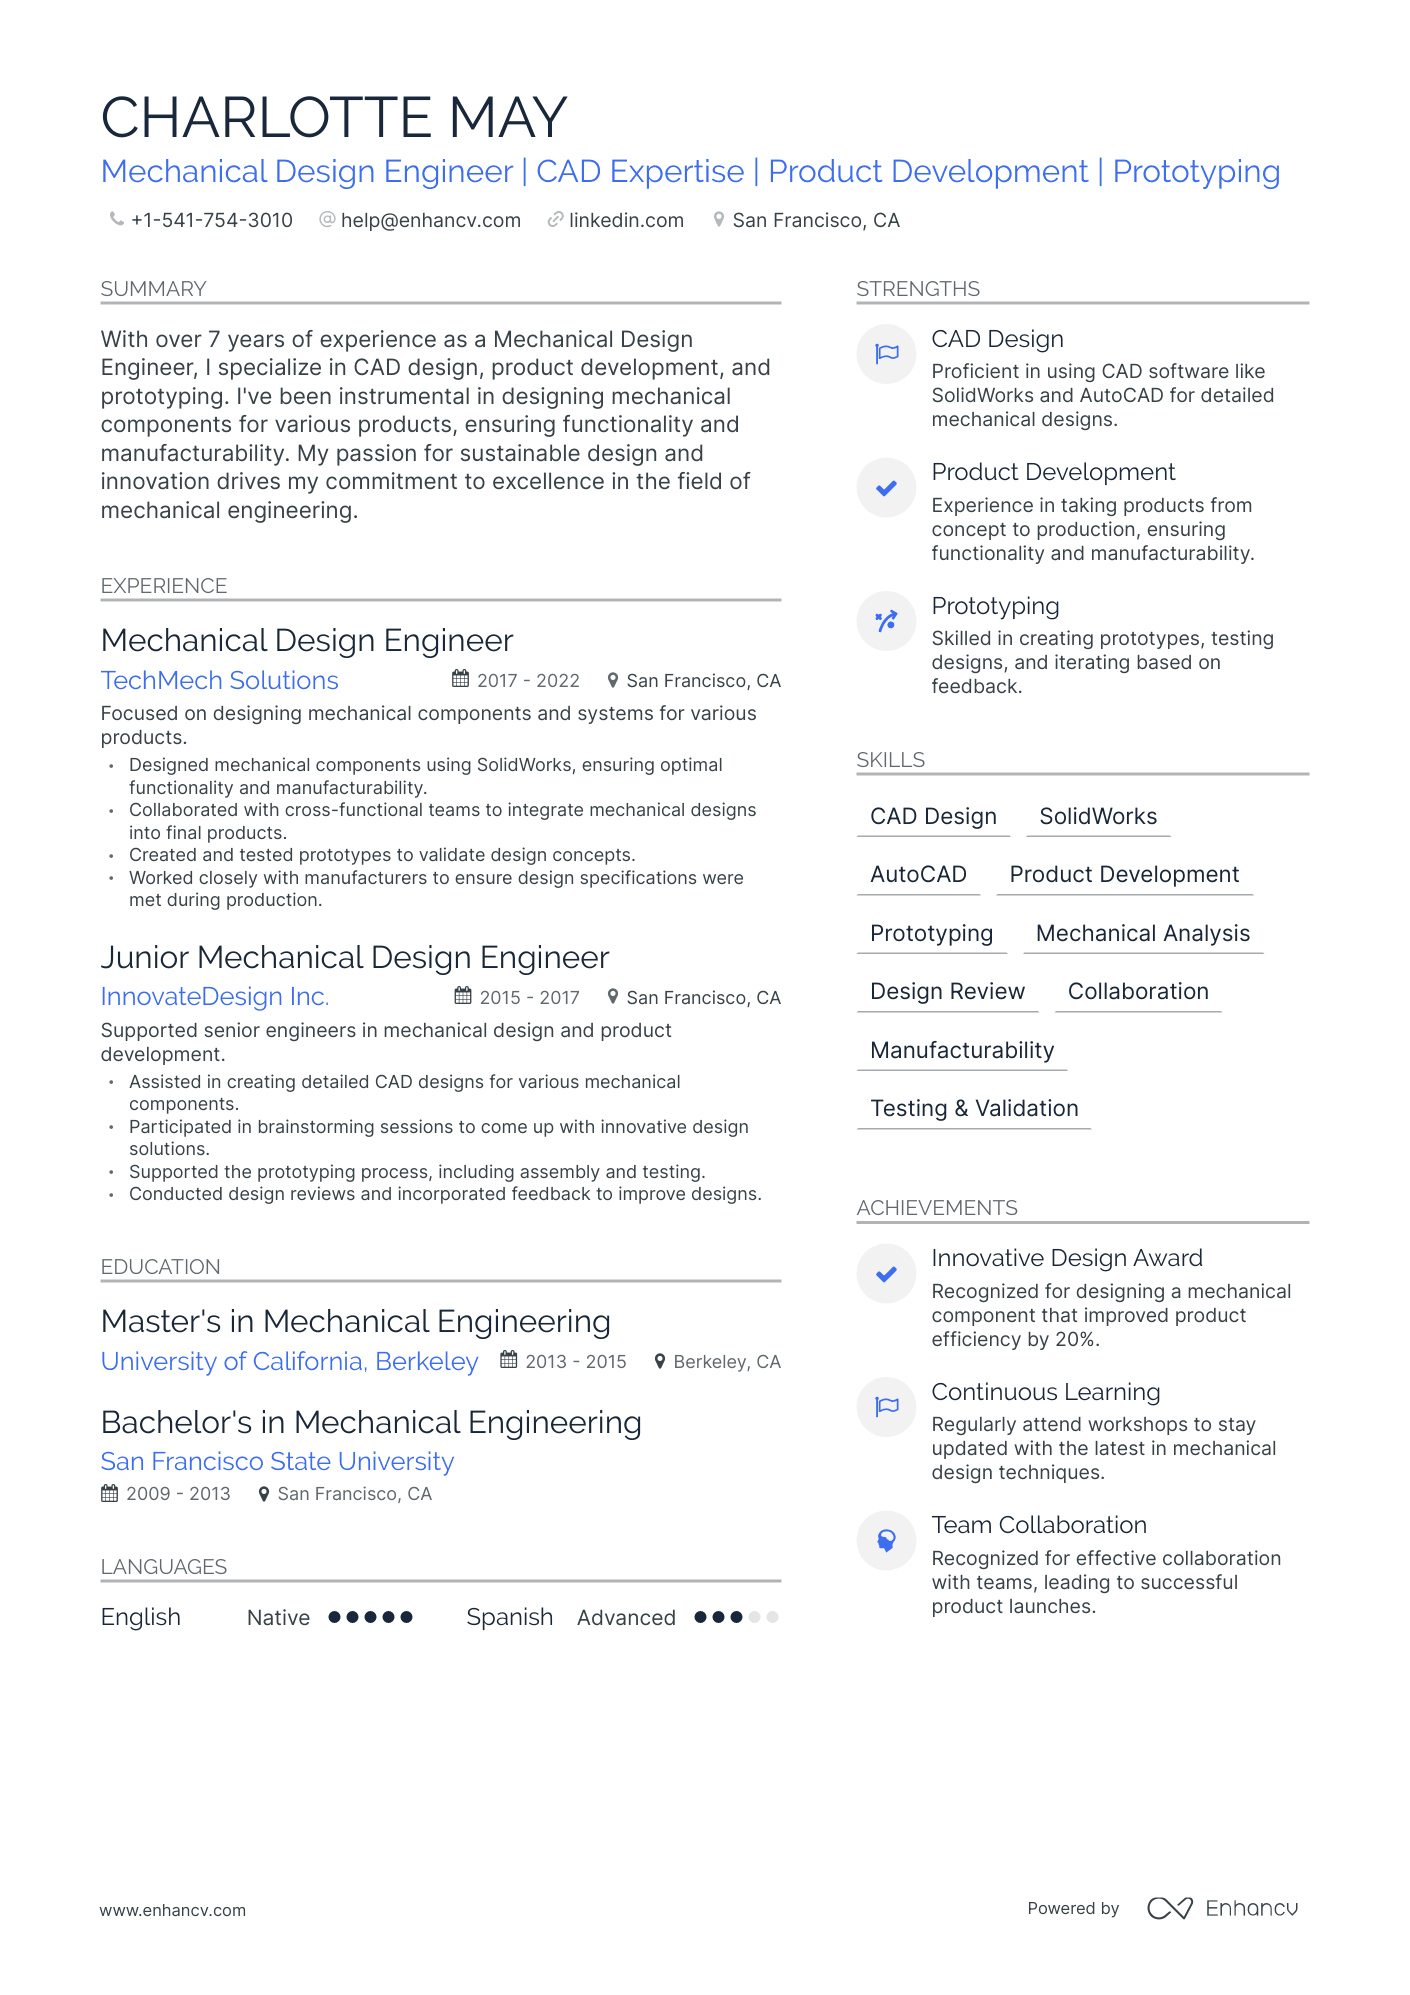 experience resume format for mechanical design engineer